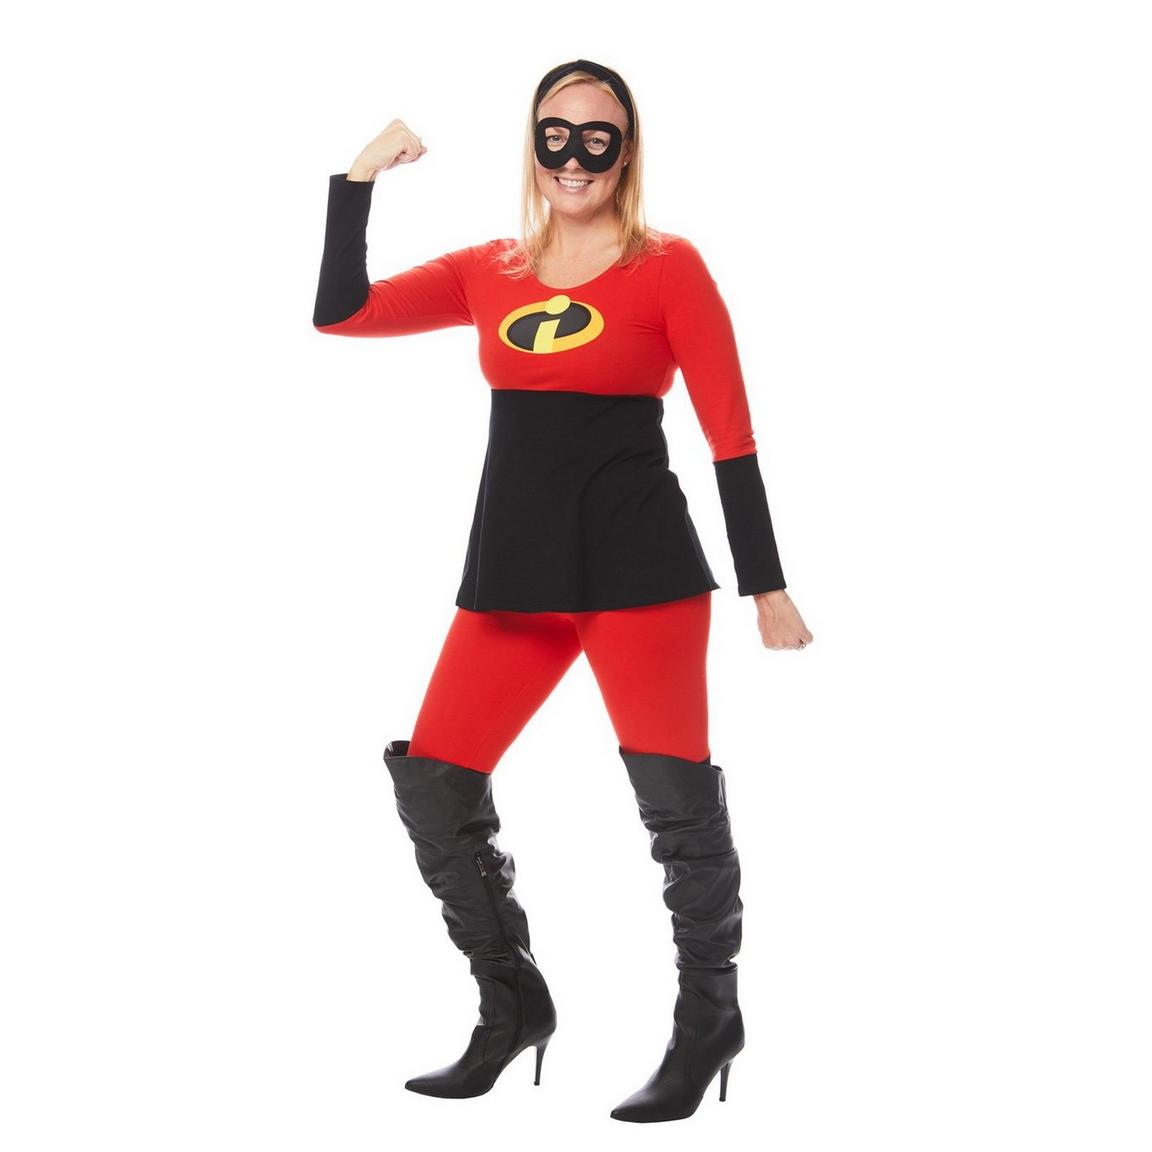 Disney The Incredibles Mrs.Incredible Adult Costume, Size: Medium, Rubie's Costume Company